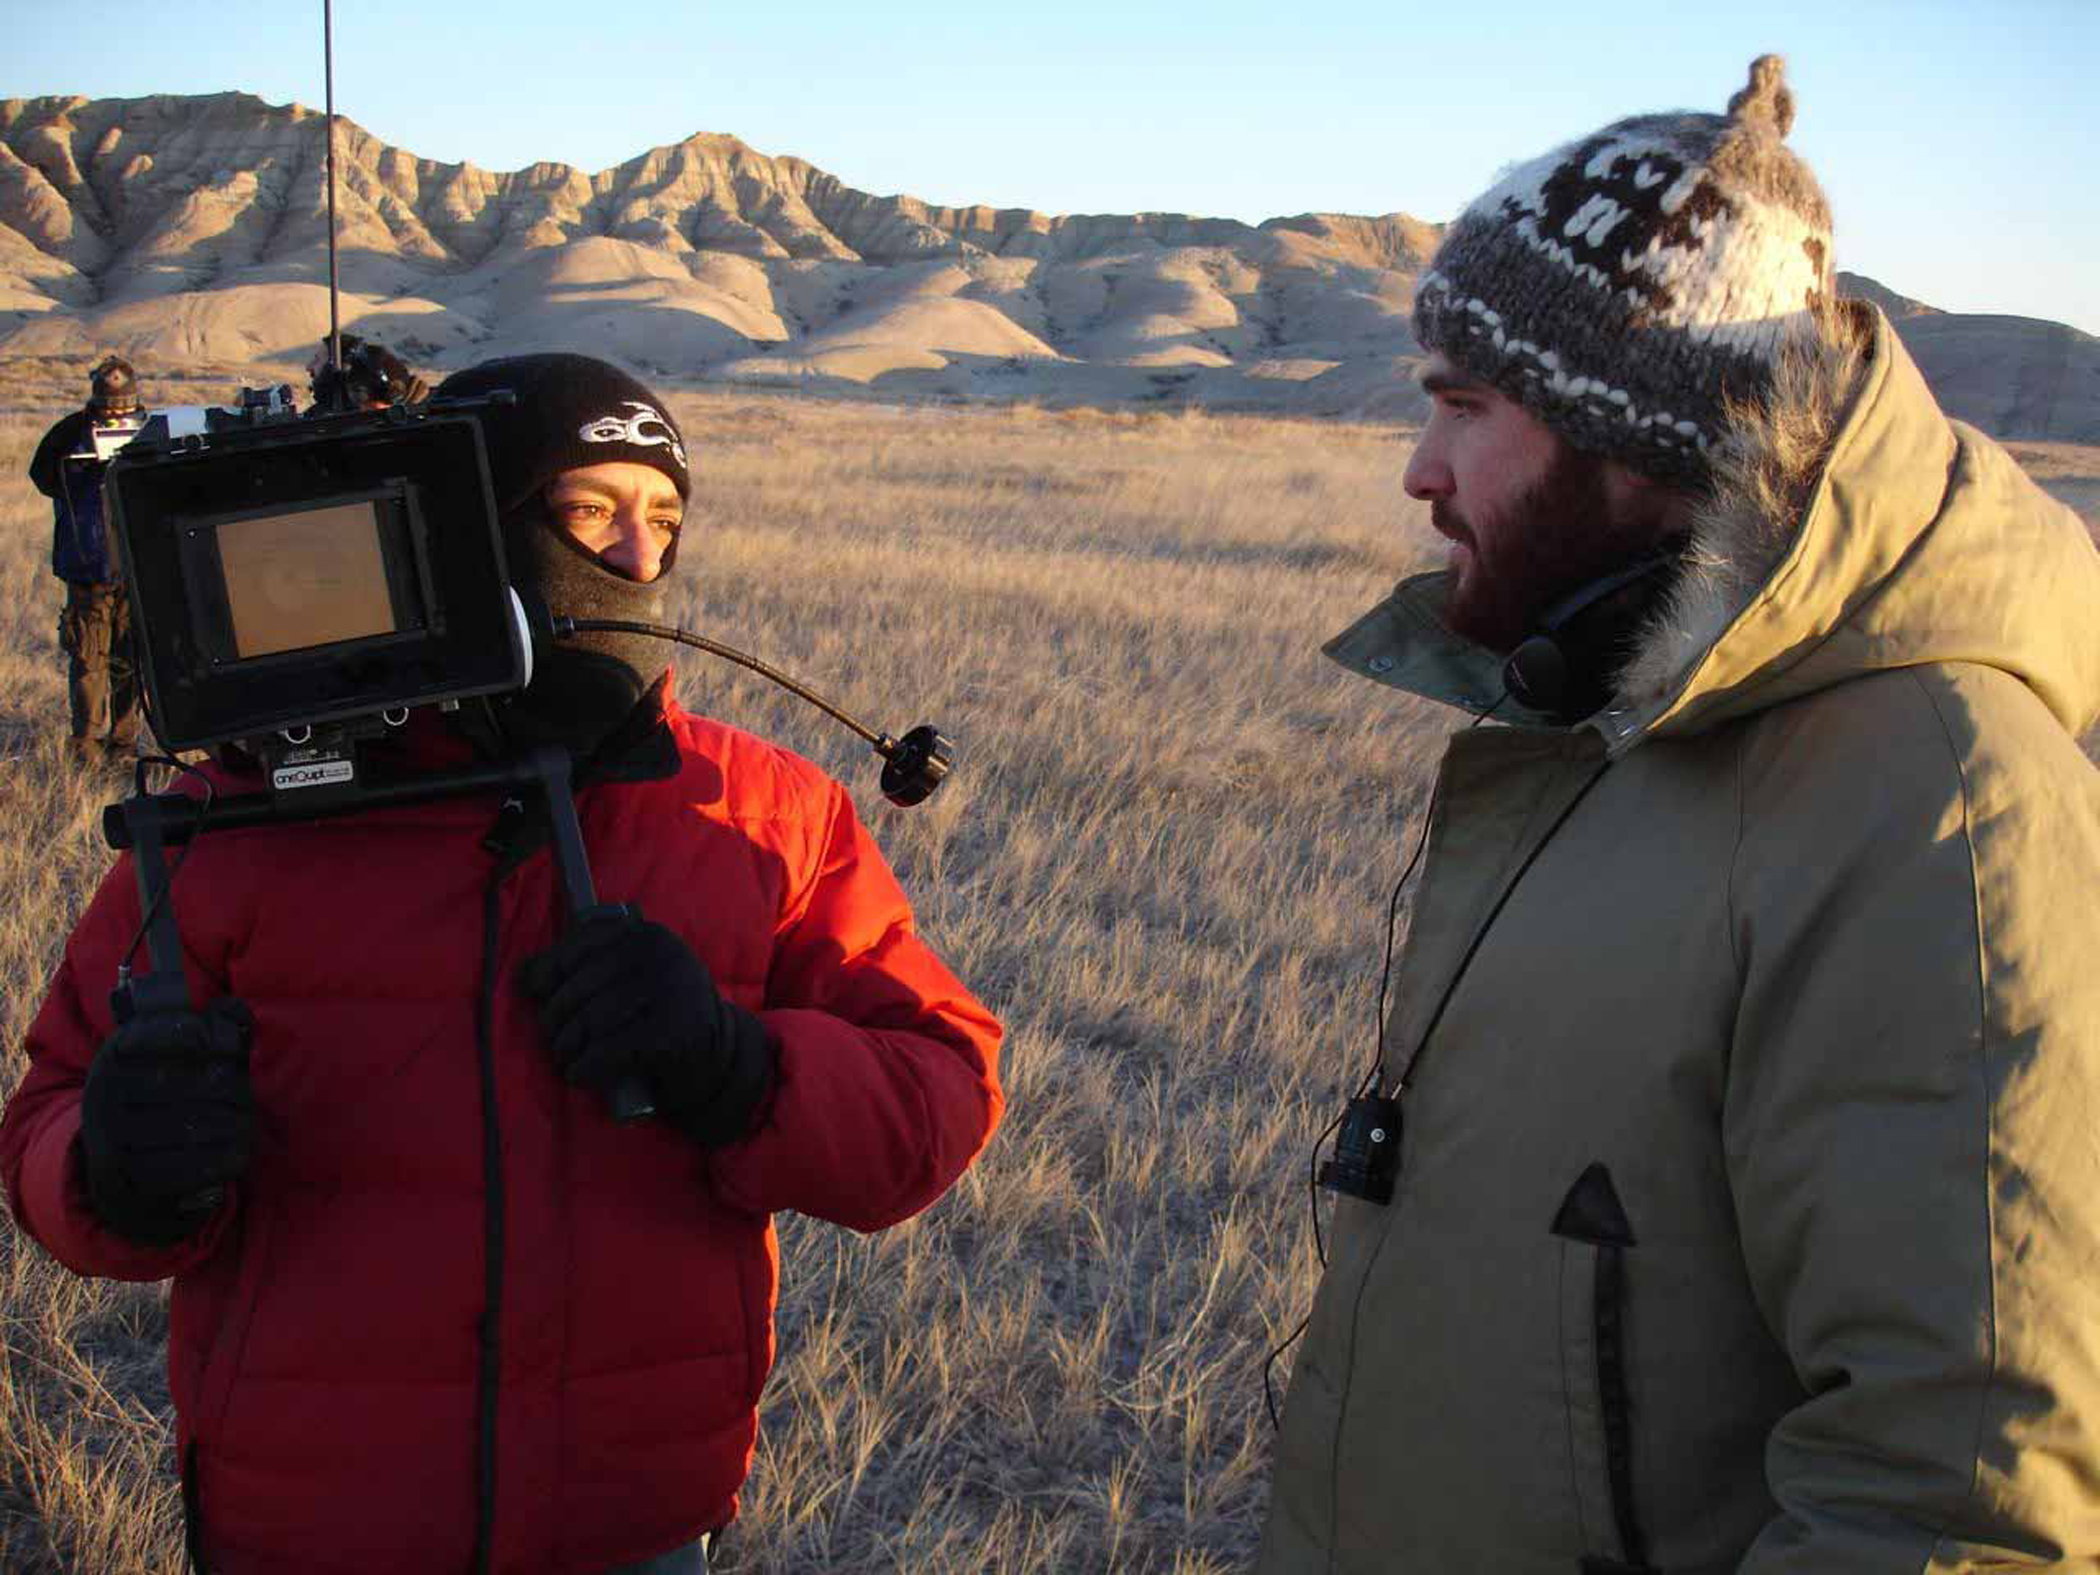 Director, Christopher Martini and Cinematographer, John Rotan, on location in the Badlands shooting 